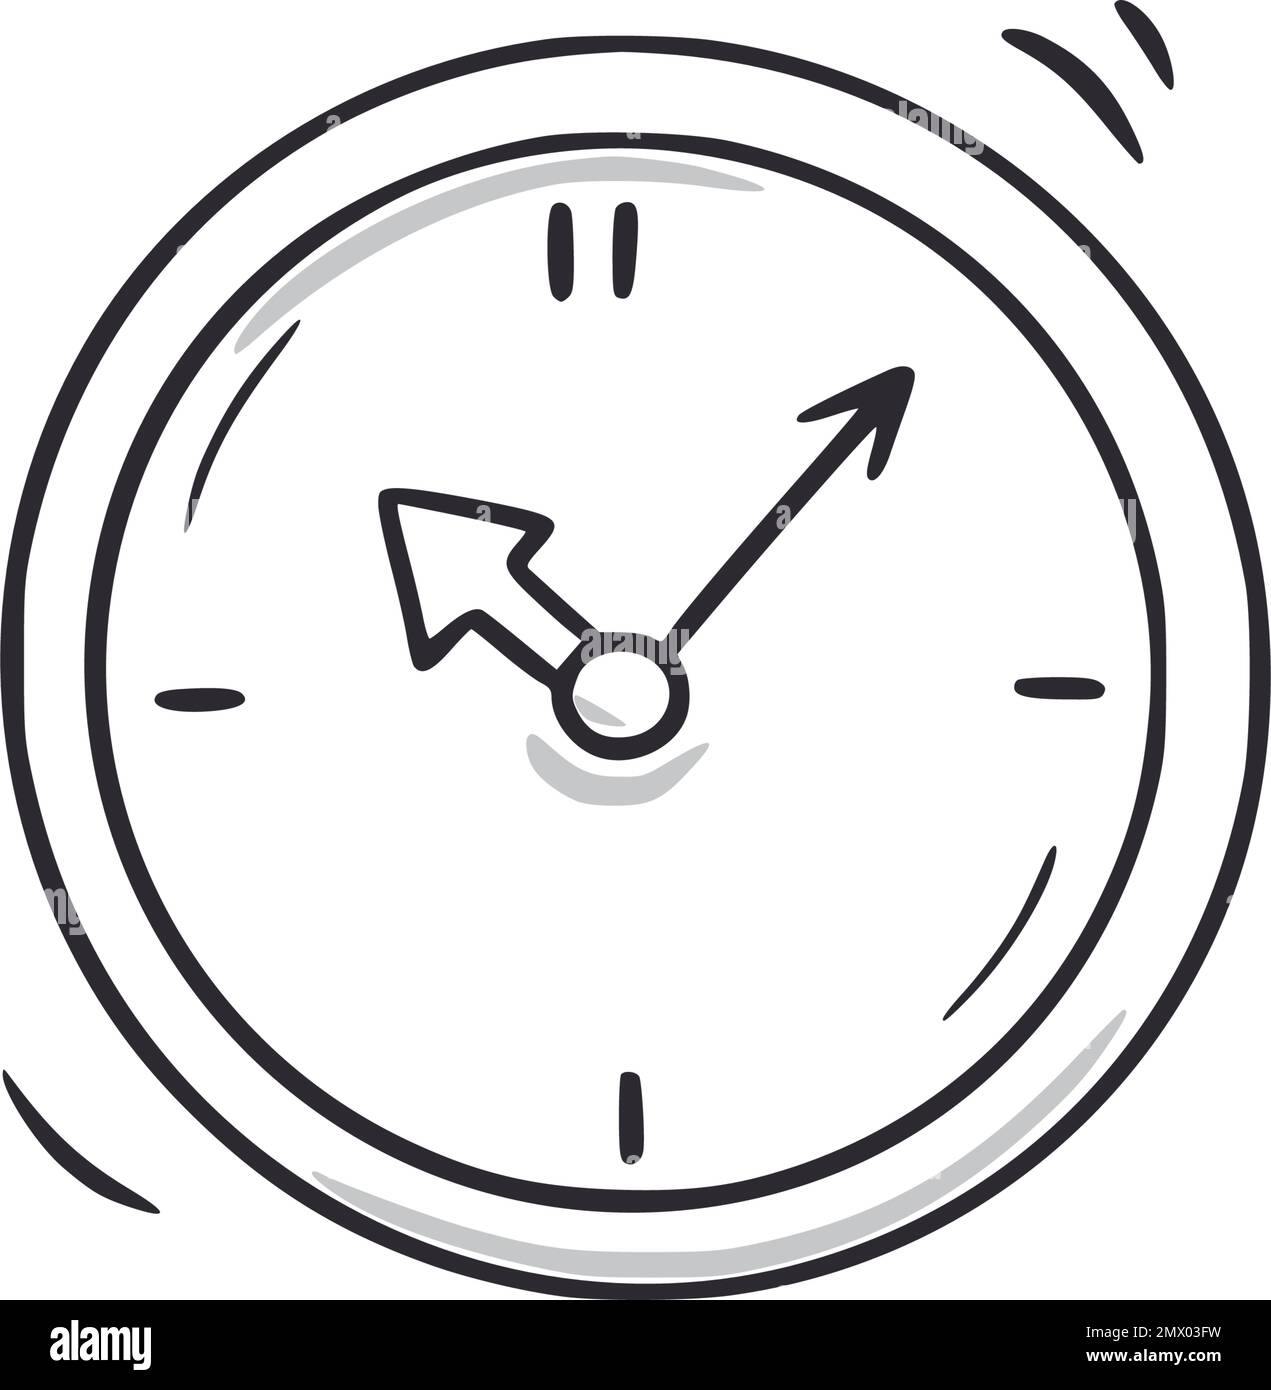 Clock doodle. Clock time hand drawn sketch style icon. Time measurement doodle drawn concept. Vector illustration Stock Vector